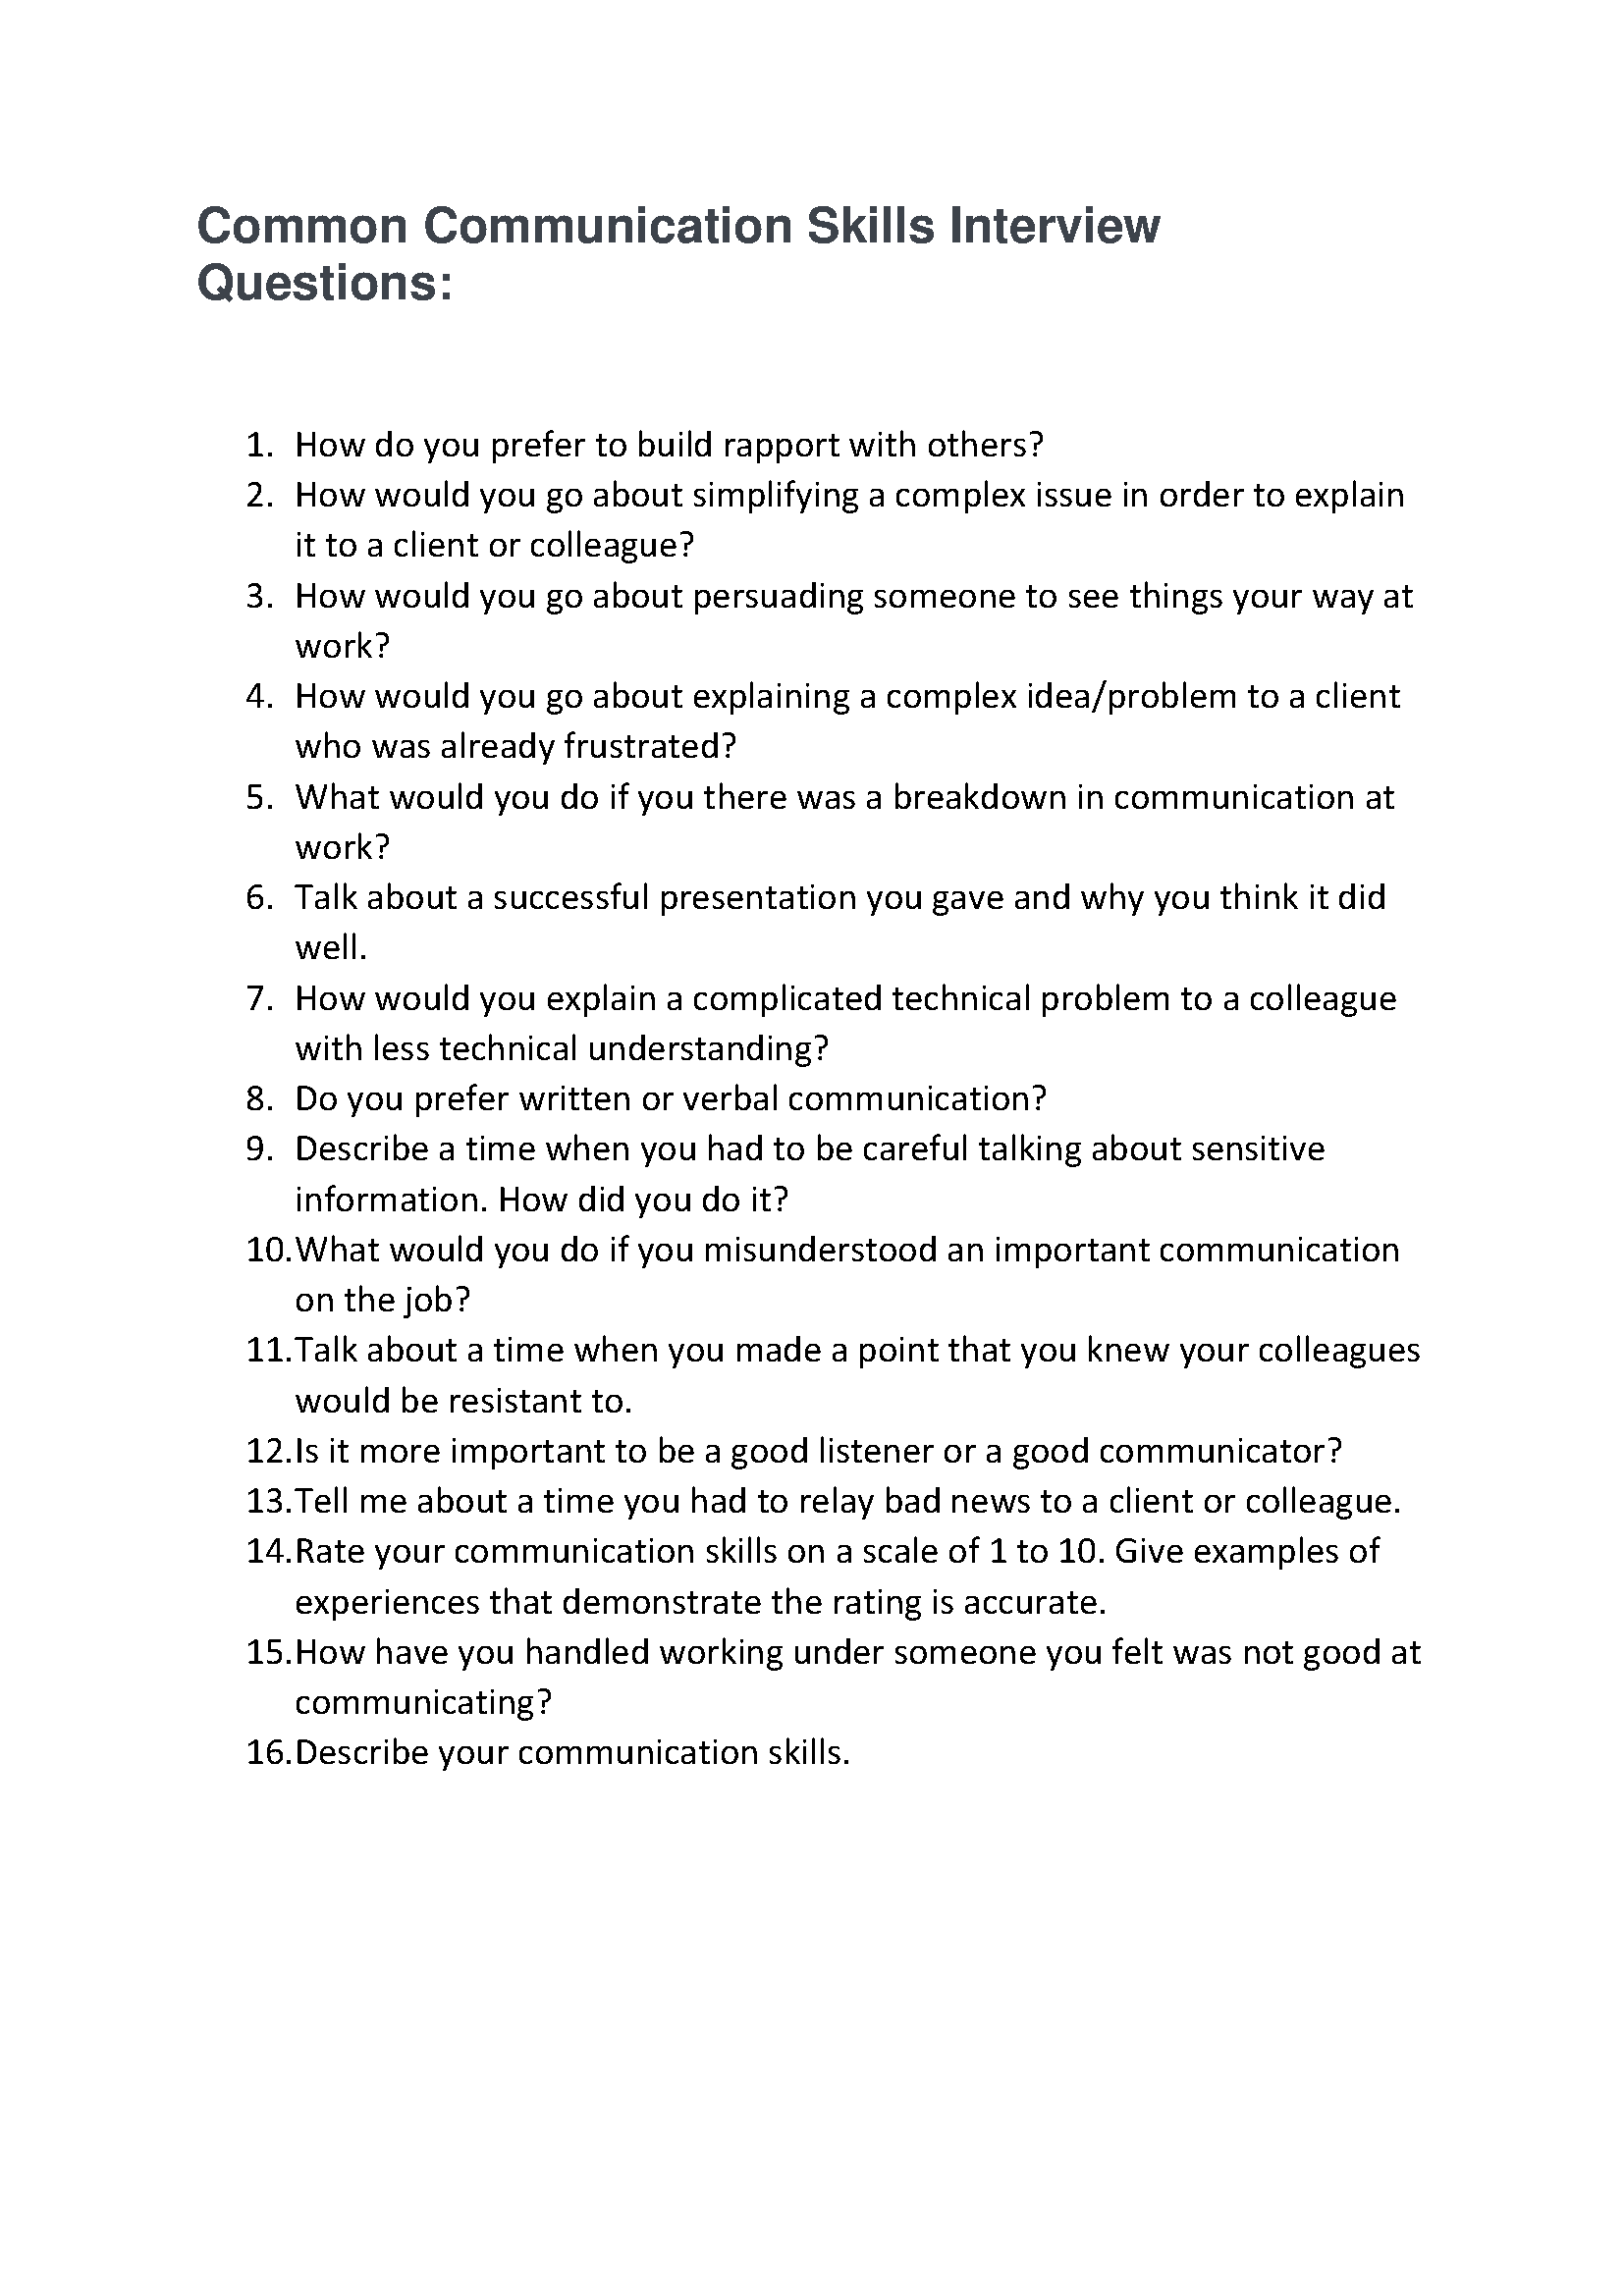 4 - Communication Skills Interview Questions